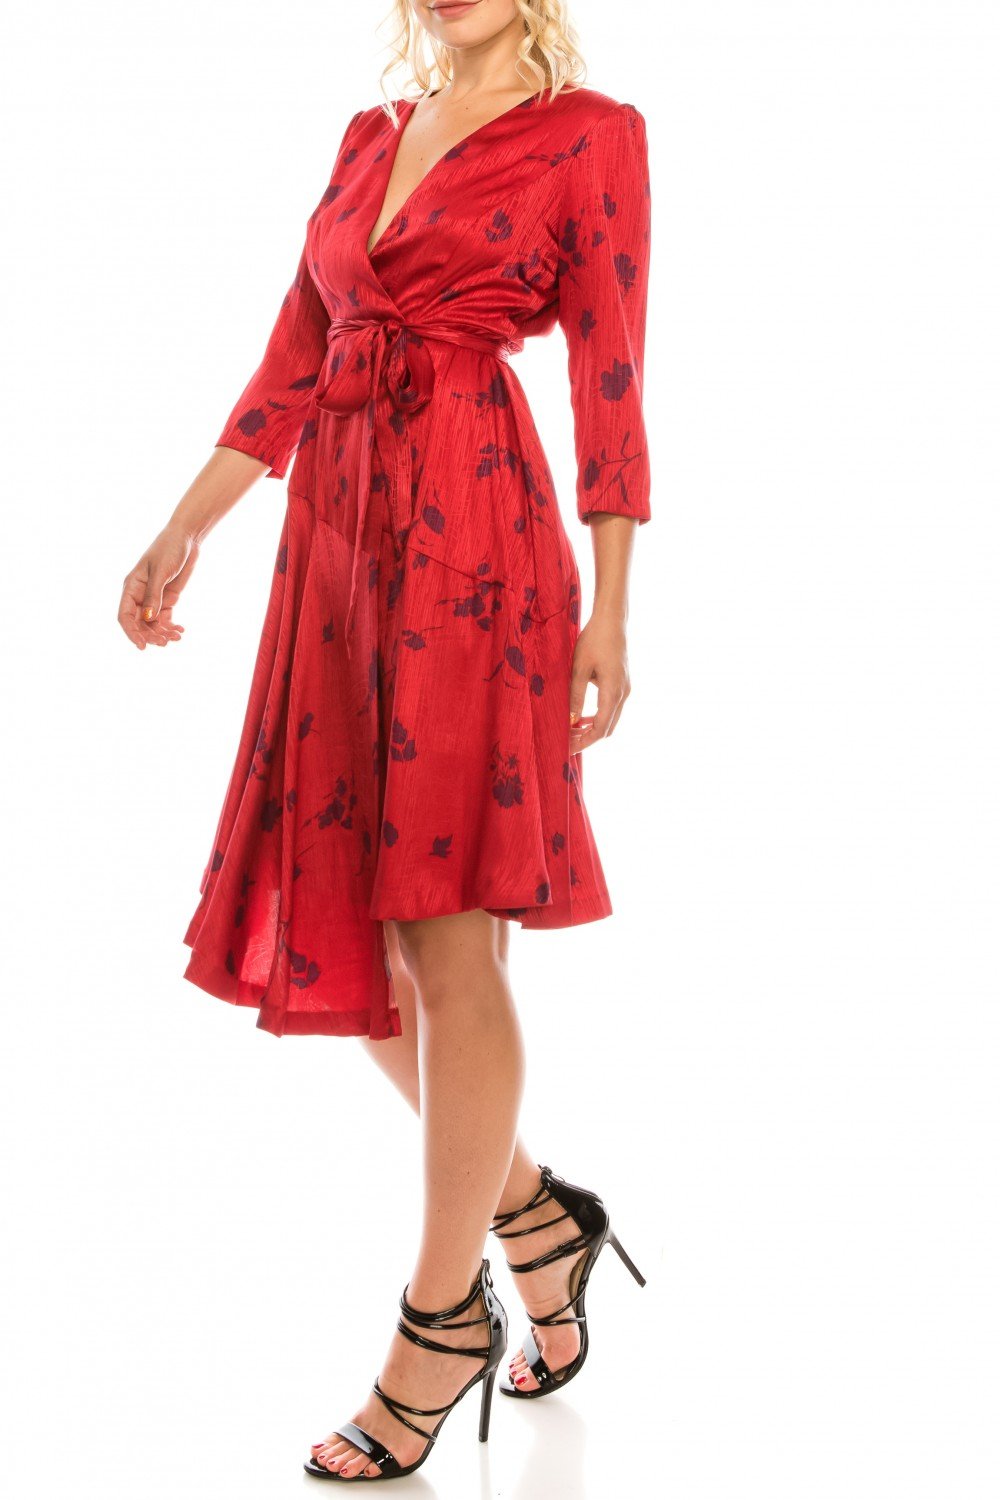 Gabby Skye - 18514M Three Quarter Sleeve Twill Faux Wrap Dress In Red and Floral